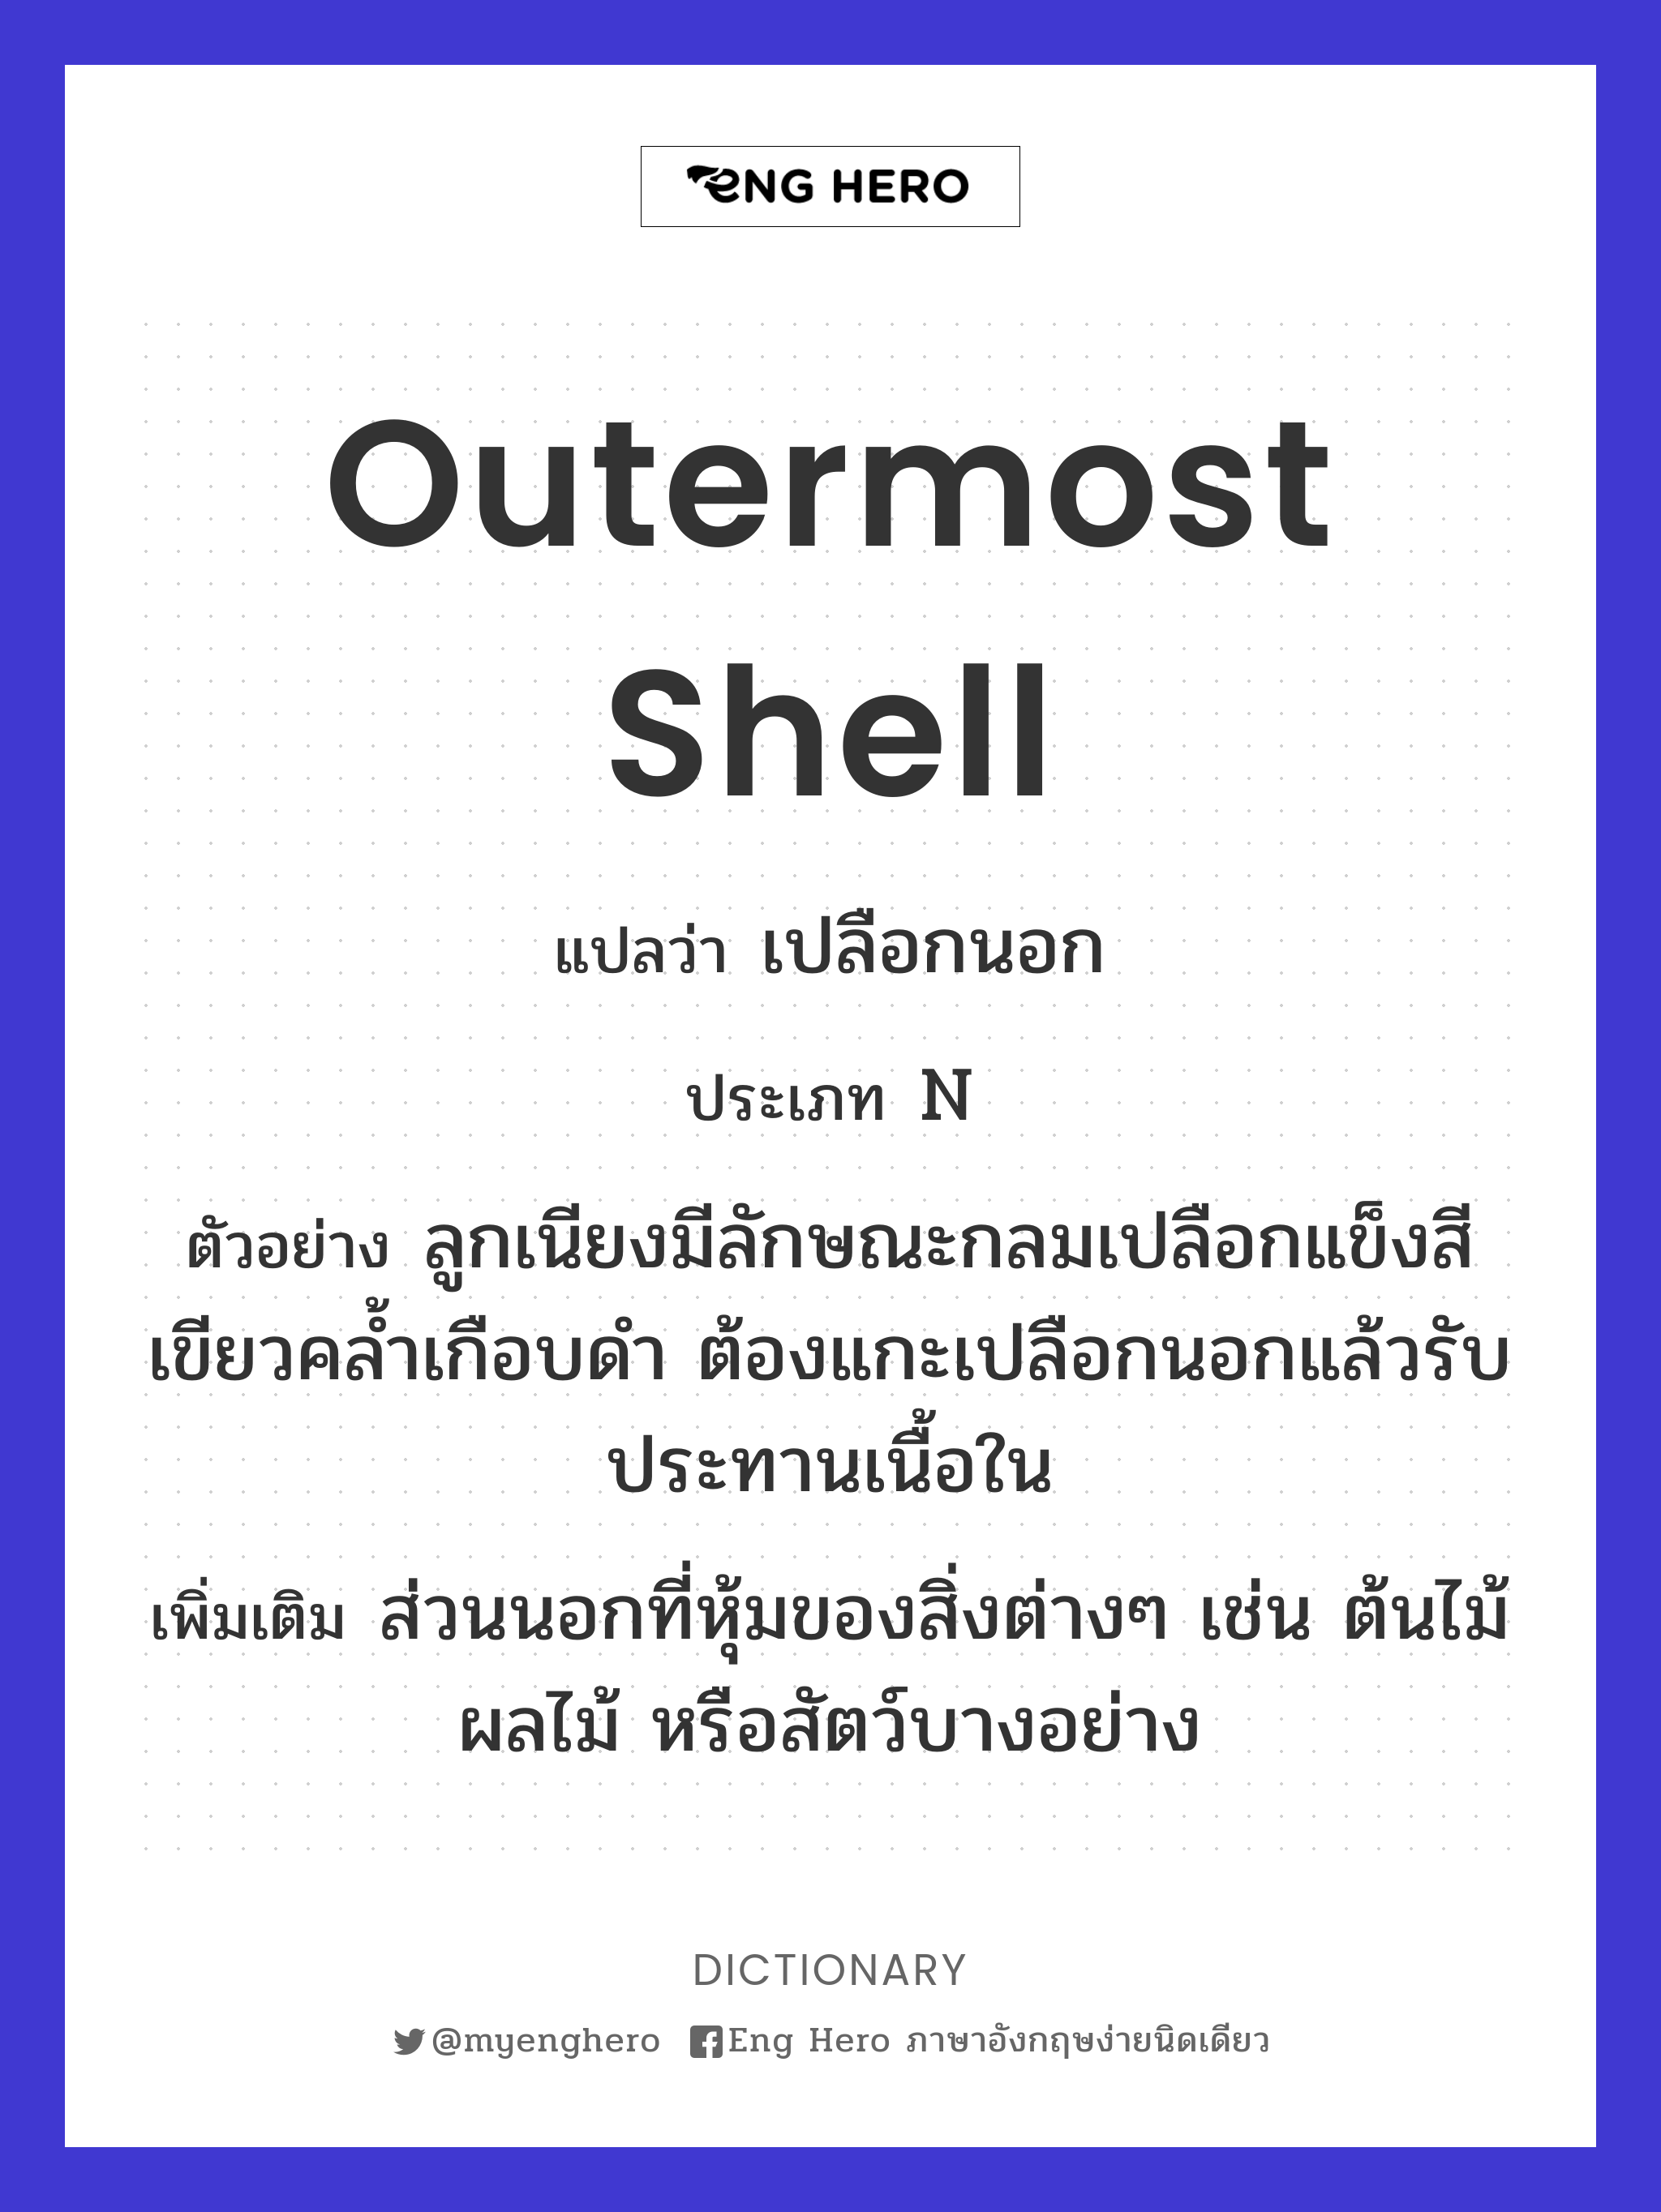 outermost shell